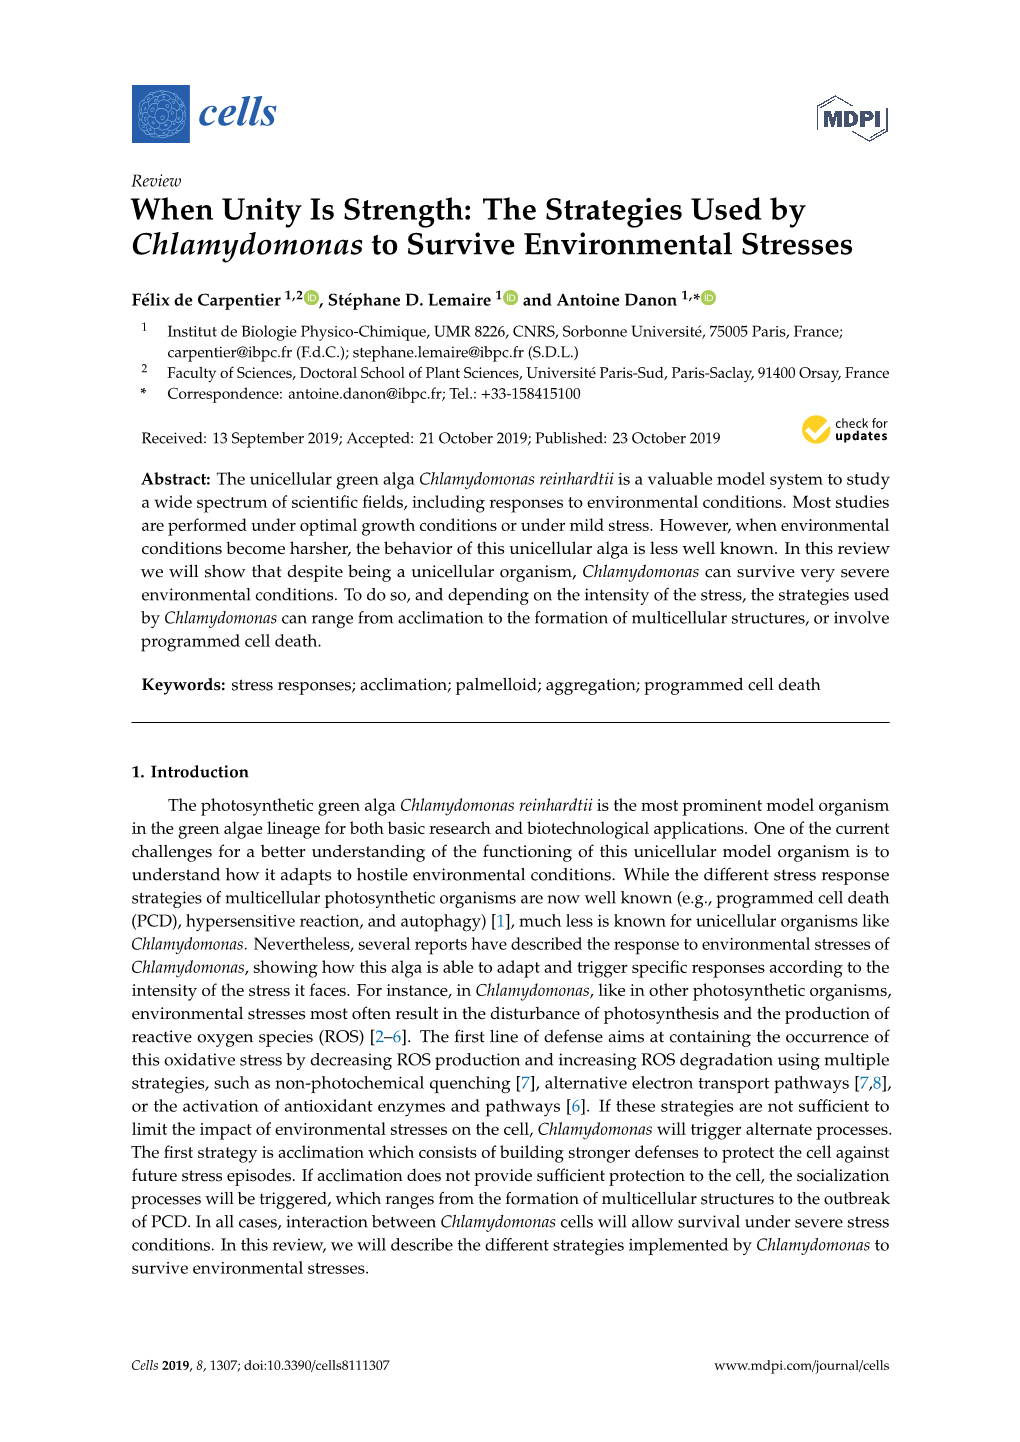 When Unity Is Strength: the Strategies Used by Chlamydomonas to Survive Environmental Stresses